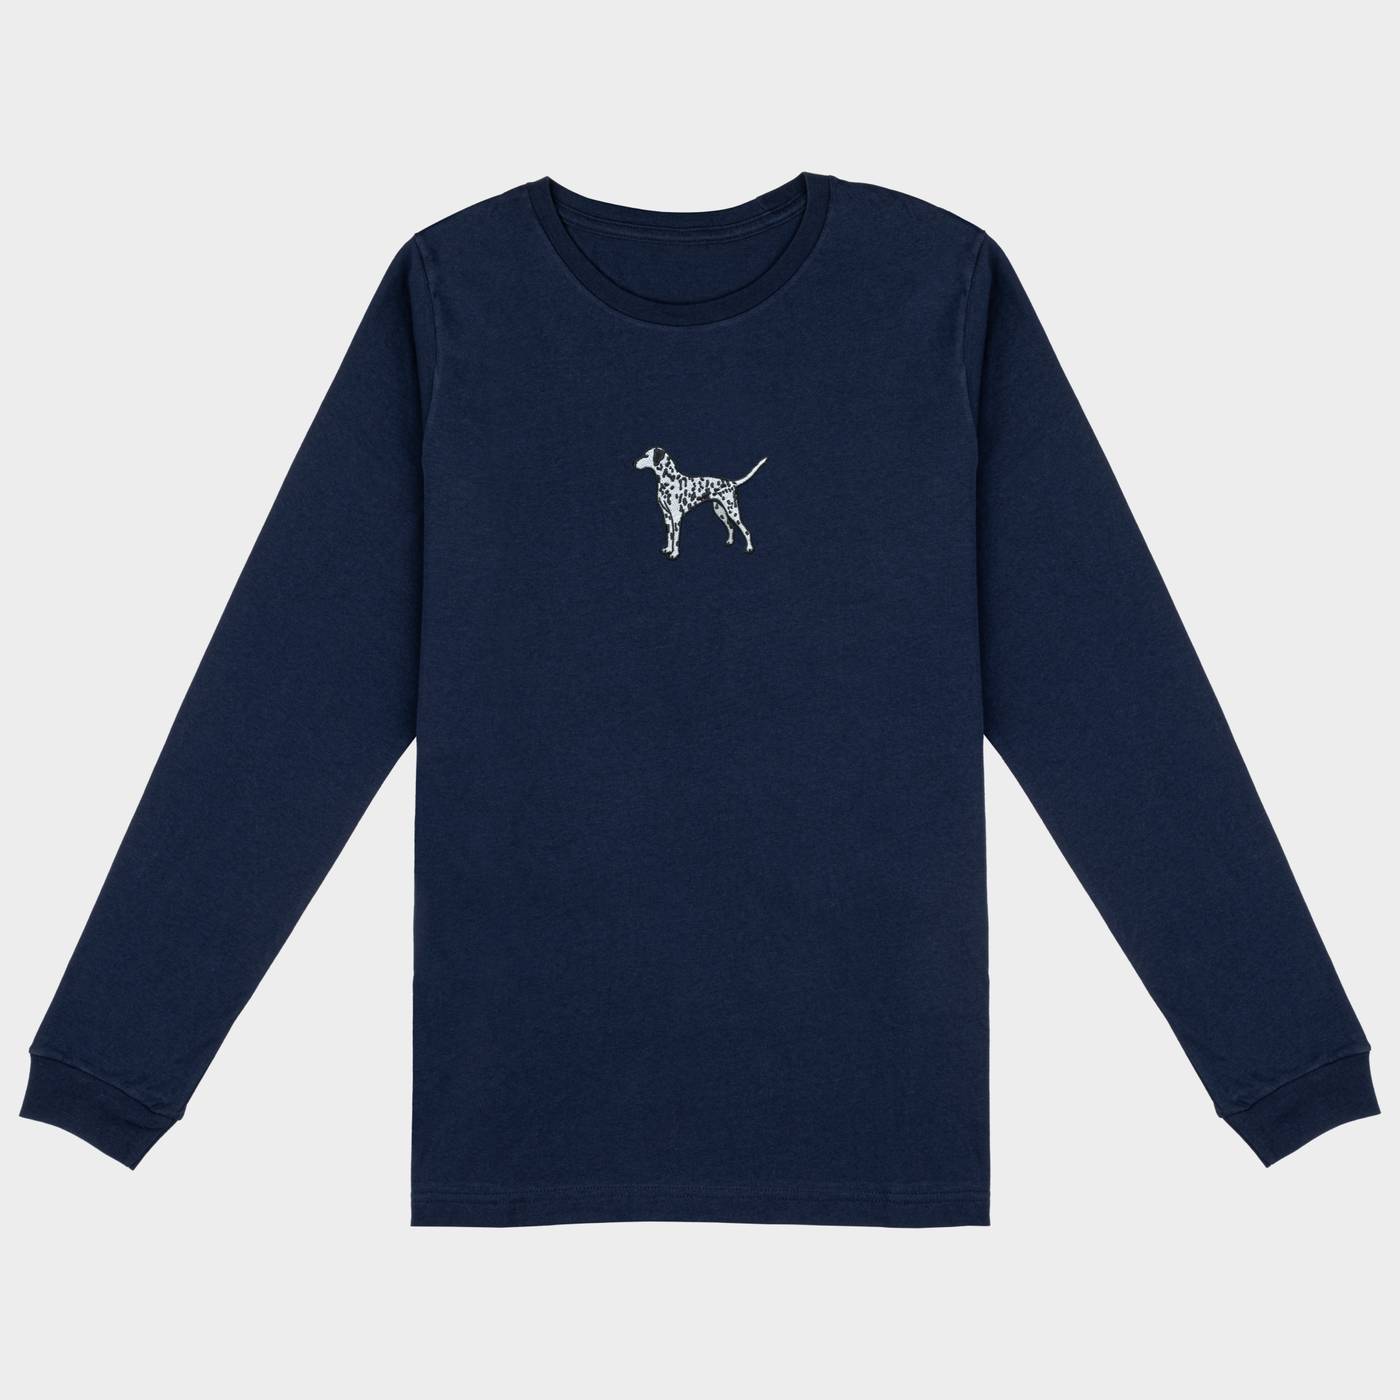 Bobby's Planet Women's Embroidered Dalmatian Long Sleeve Shirt from Paws Dog Cat Animals Collection in Navy Color#color_navy